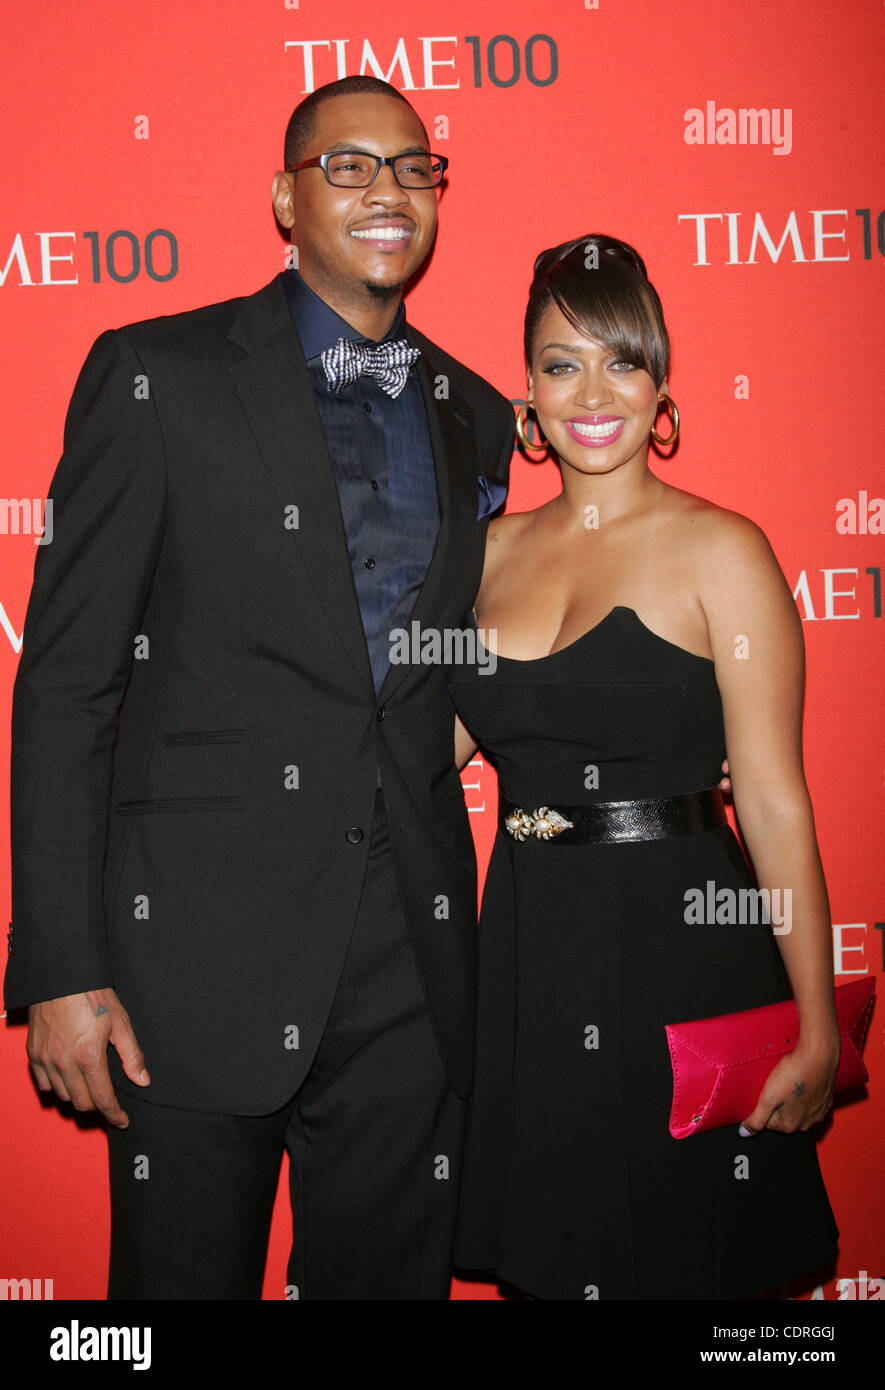 Apr. 26, 2011 - New York, New York, U.S. - CARMELO ANTHONY AND LALA VAZQUEZ arrive for the Time 100 Gala at Frederick P. Rose Hall at Time Warner Center in New York on April 26, 2011.(Credit Image: © Sharon Neetles/Globe Photos/ZUMAPRESS.com) Stock Photo